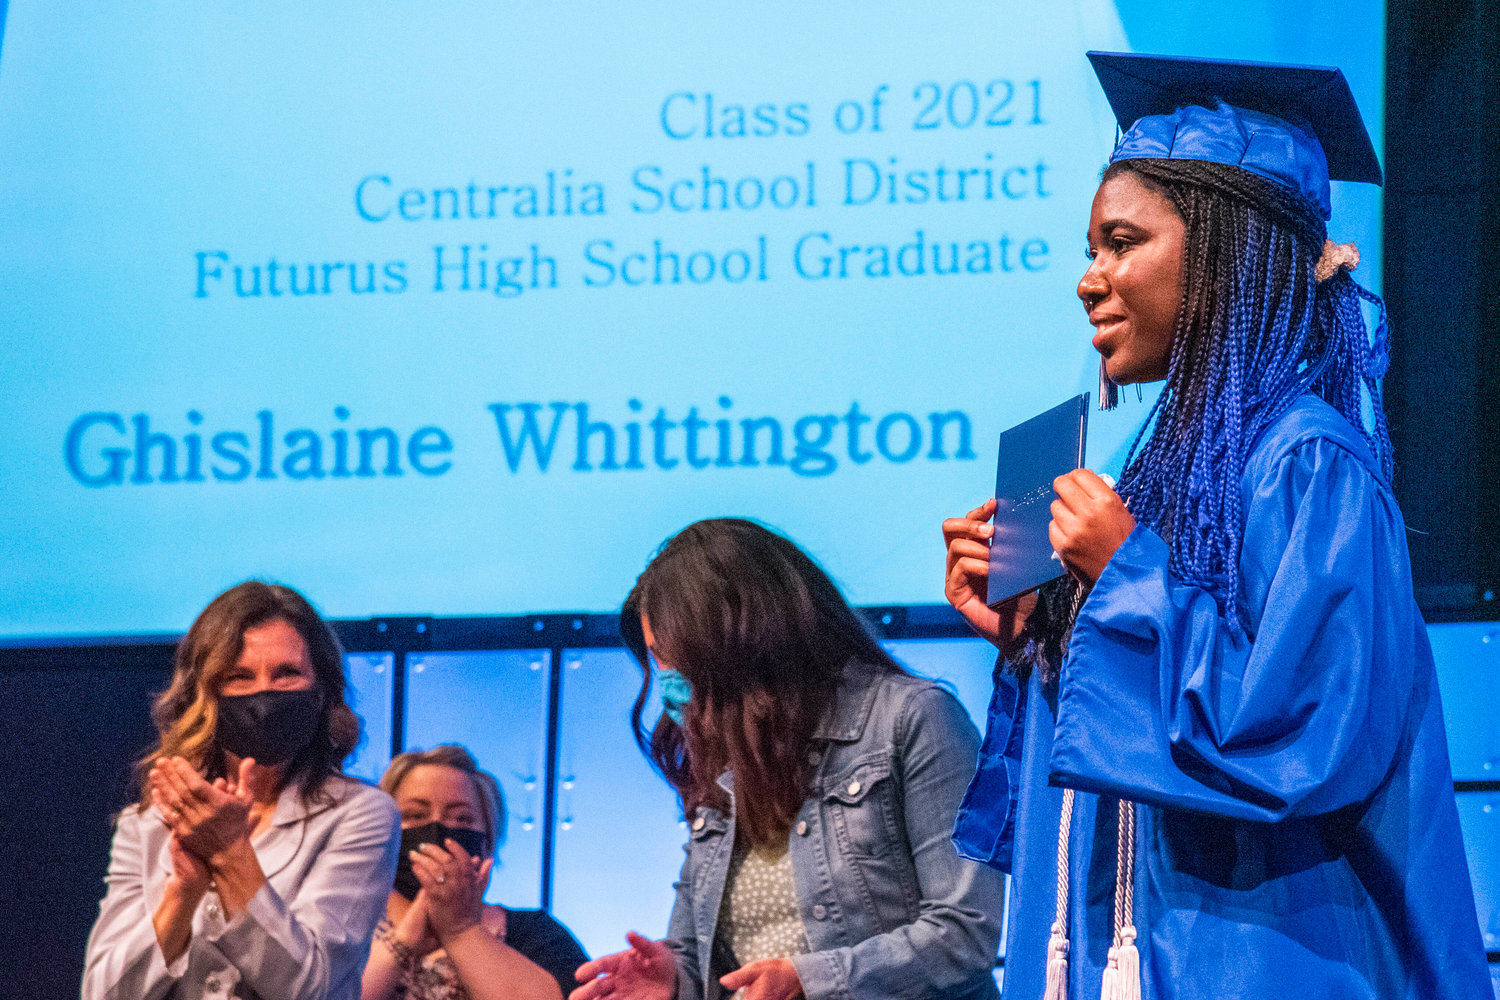 Ghislaine Whittington smiles and holds up her diploma during the Futurus High School graduation ceremony in Centralia on Tuesday.